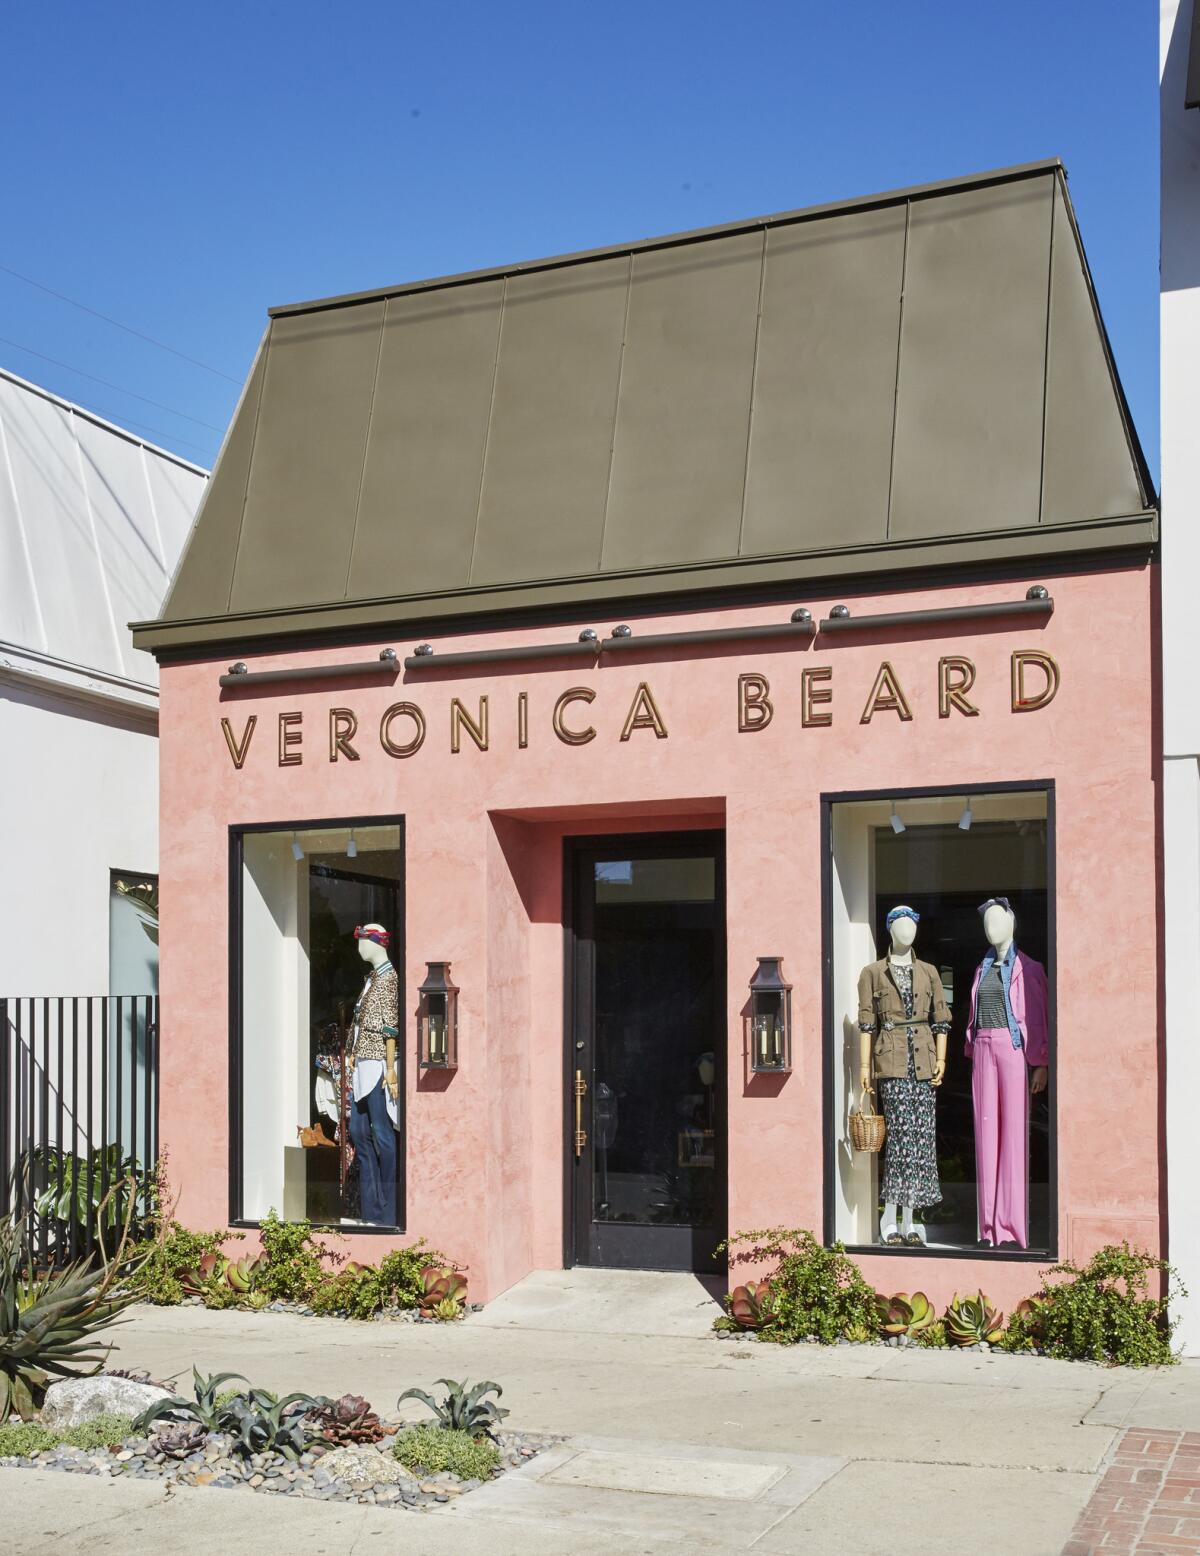 A look at the exterior of the new Veronica Beard store on Melrose Place in Los Angeles.